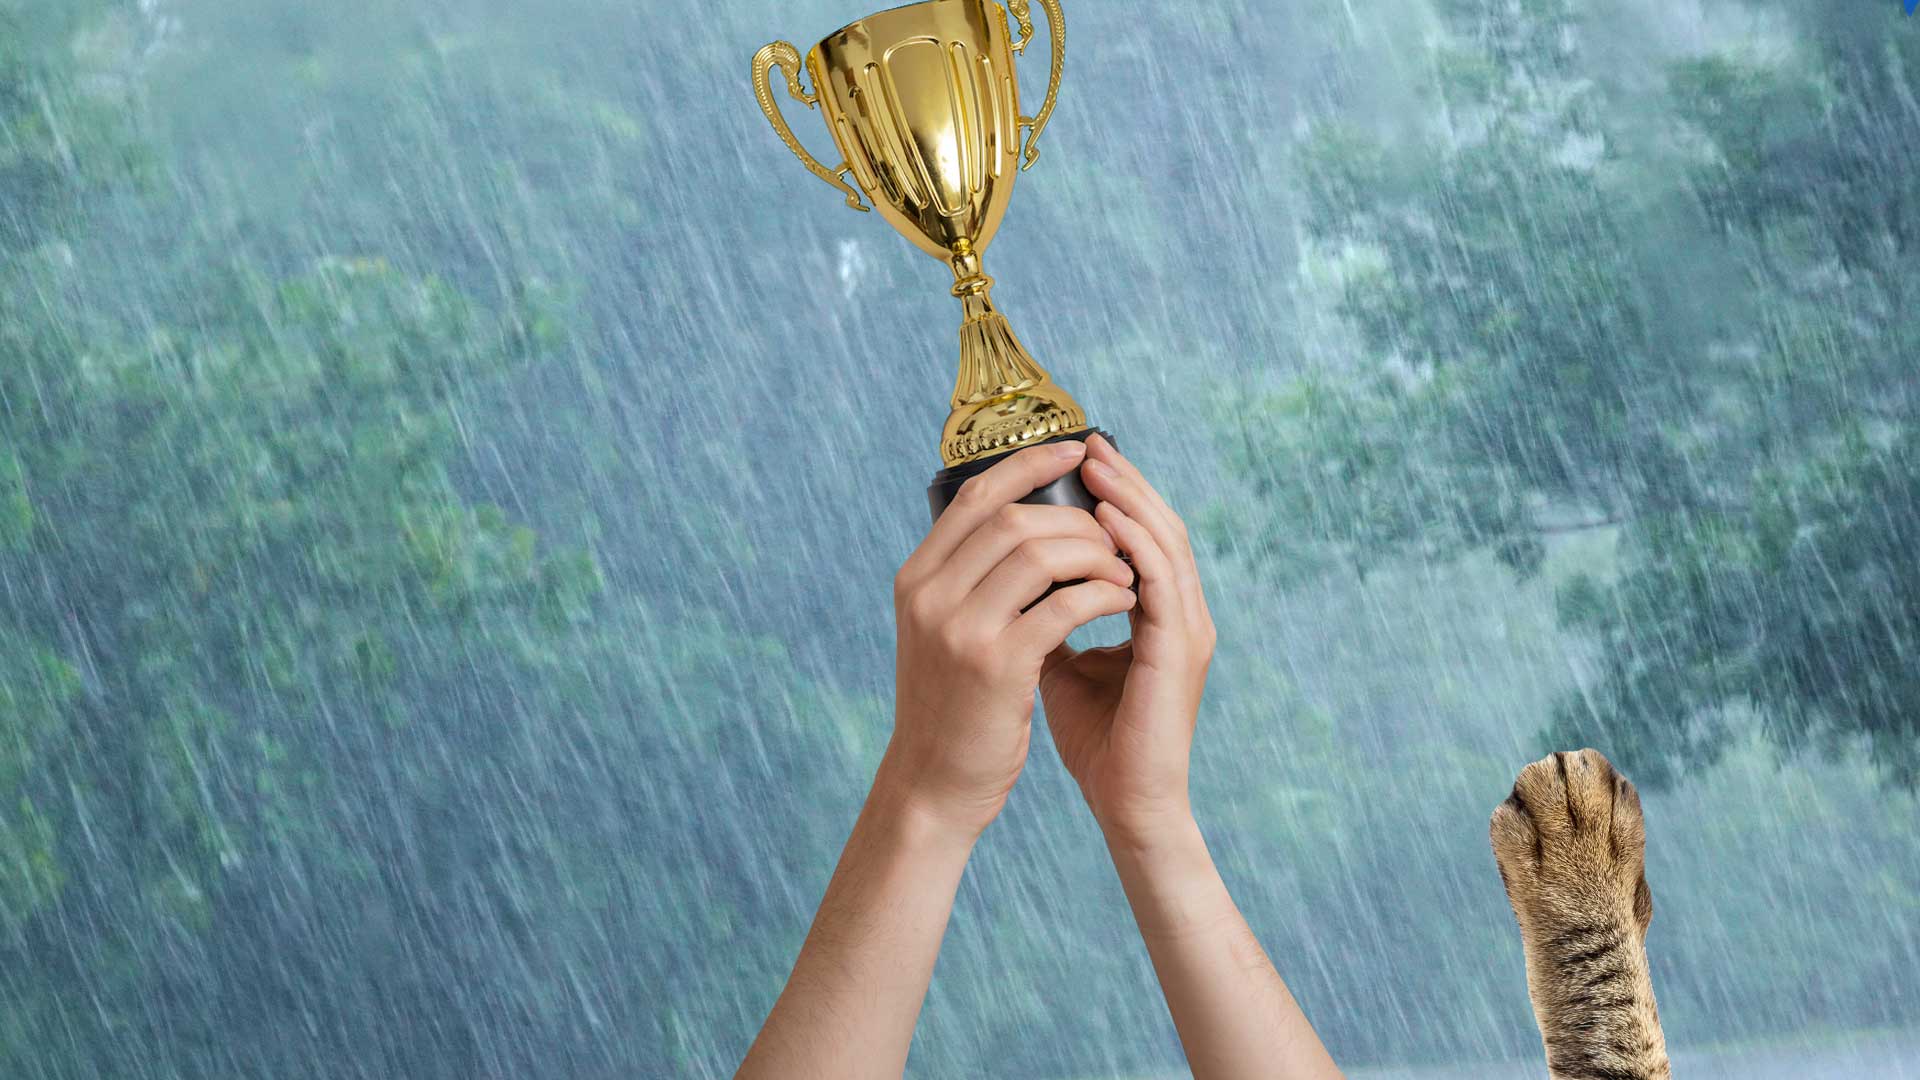 A trophy being held aloft on a rainy day